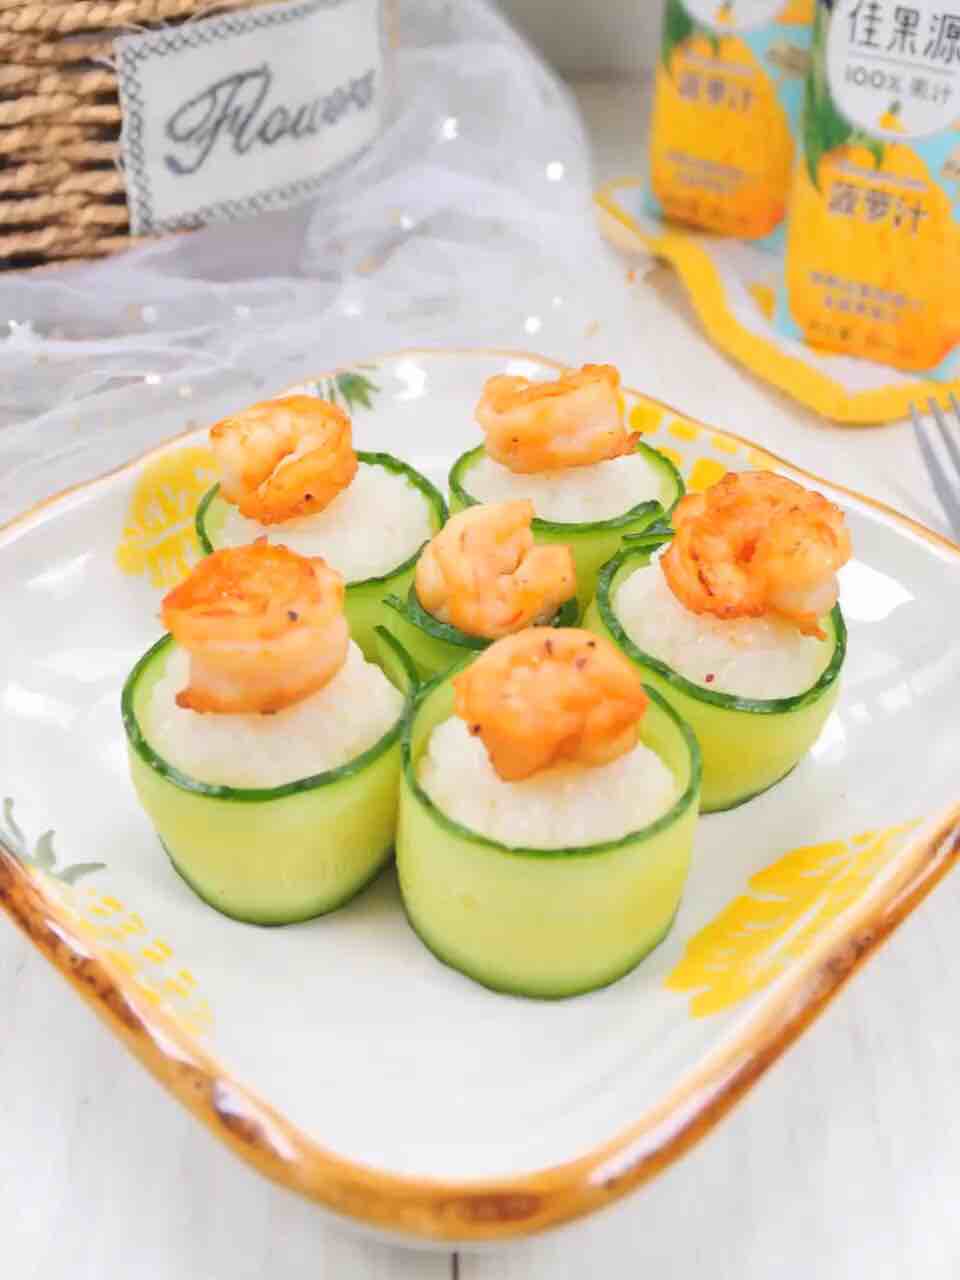 Cucumber Rolled Rice Balls with Pineapple Sauce